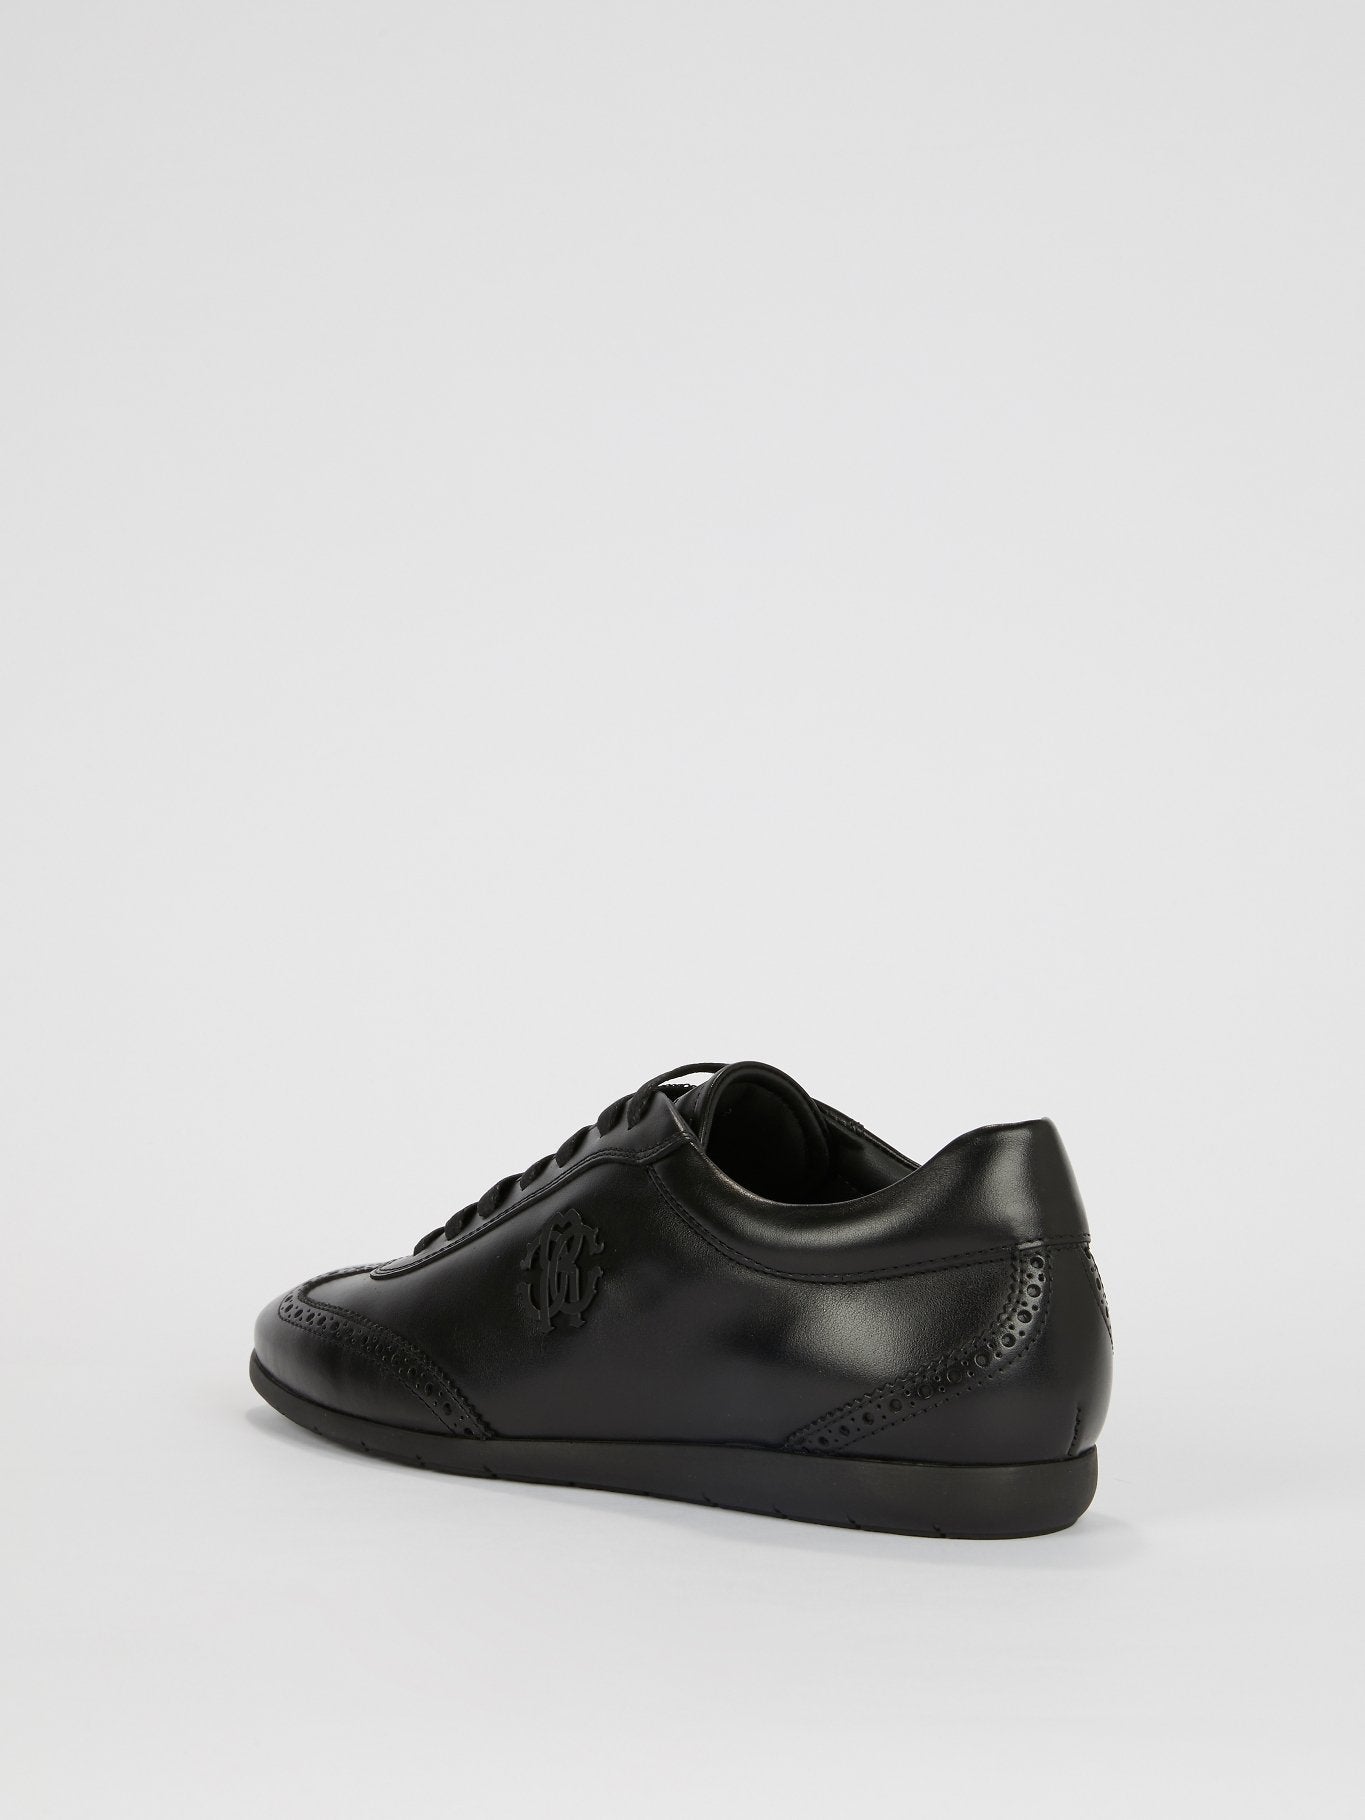 Black Low Top Leather Sneakers